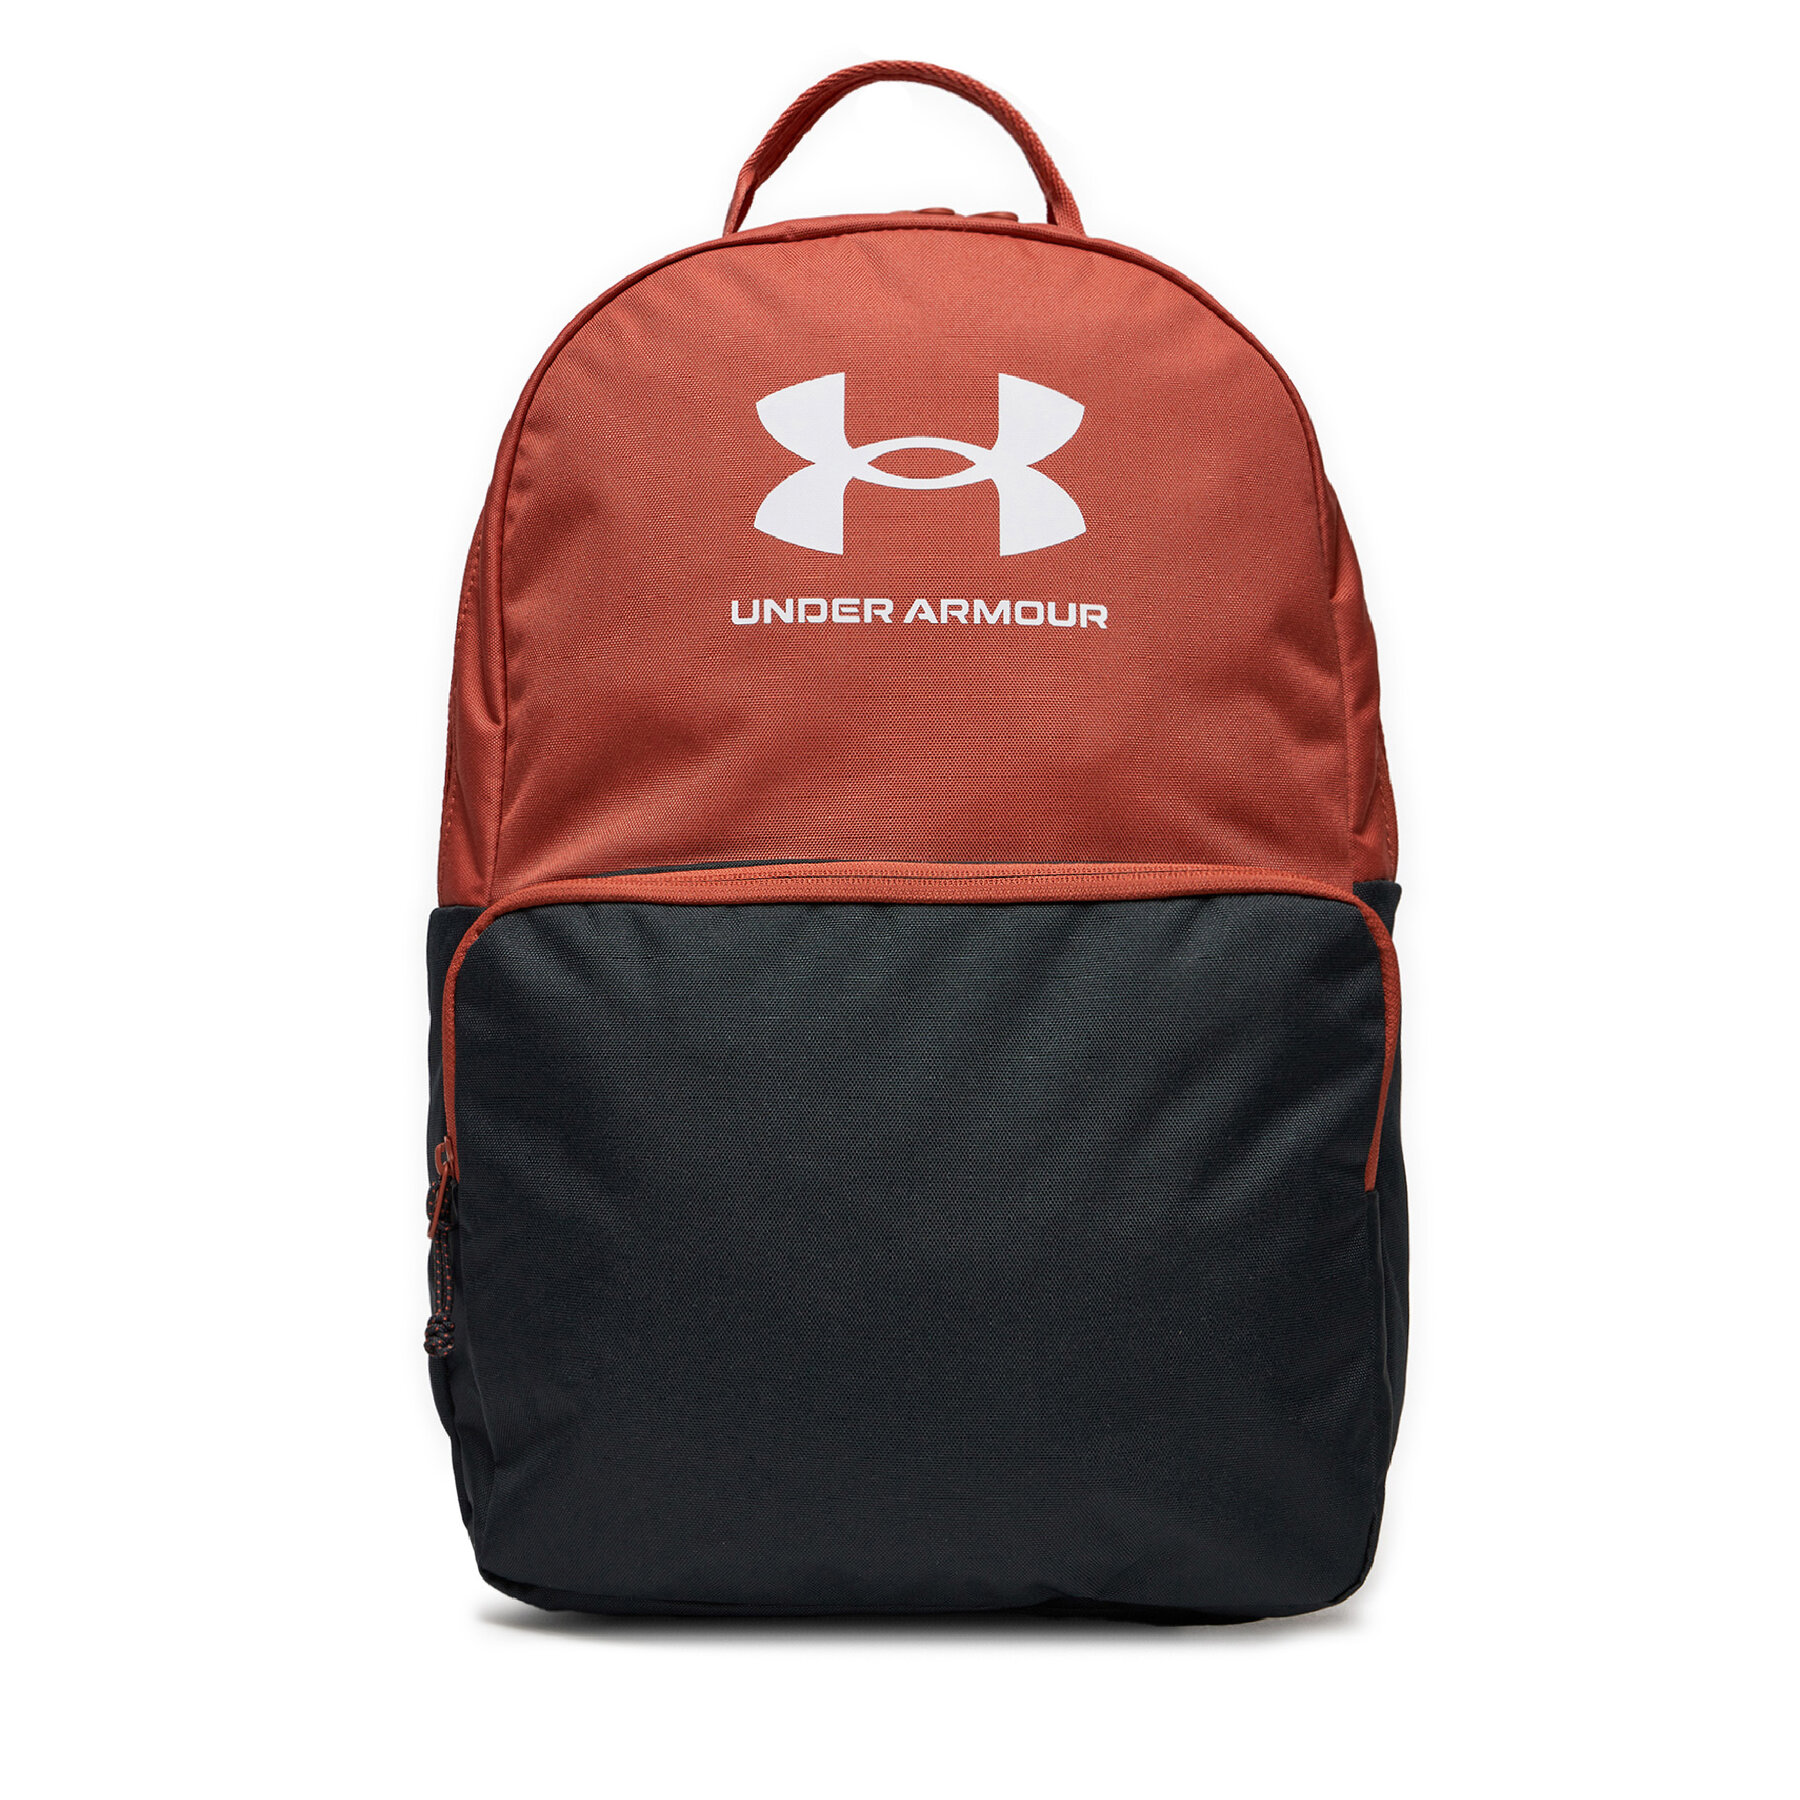 Rucksack Under Armour Ua Loudon Backpack 1378415-611 Sedona Red/Anthracite/White von Under Armour